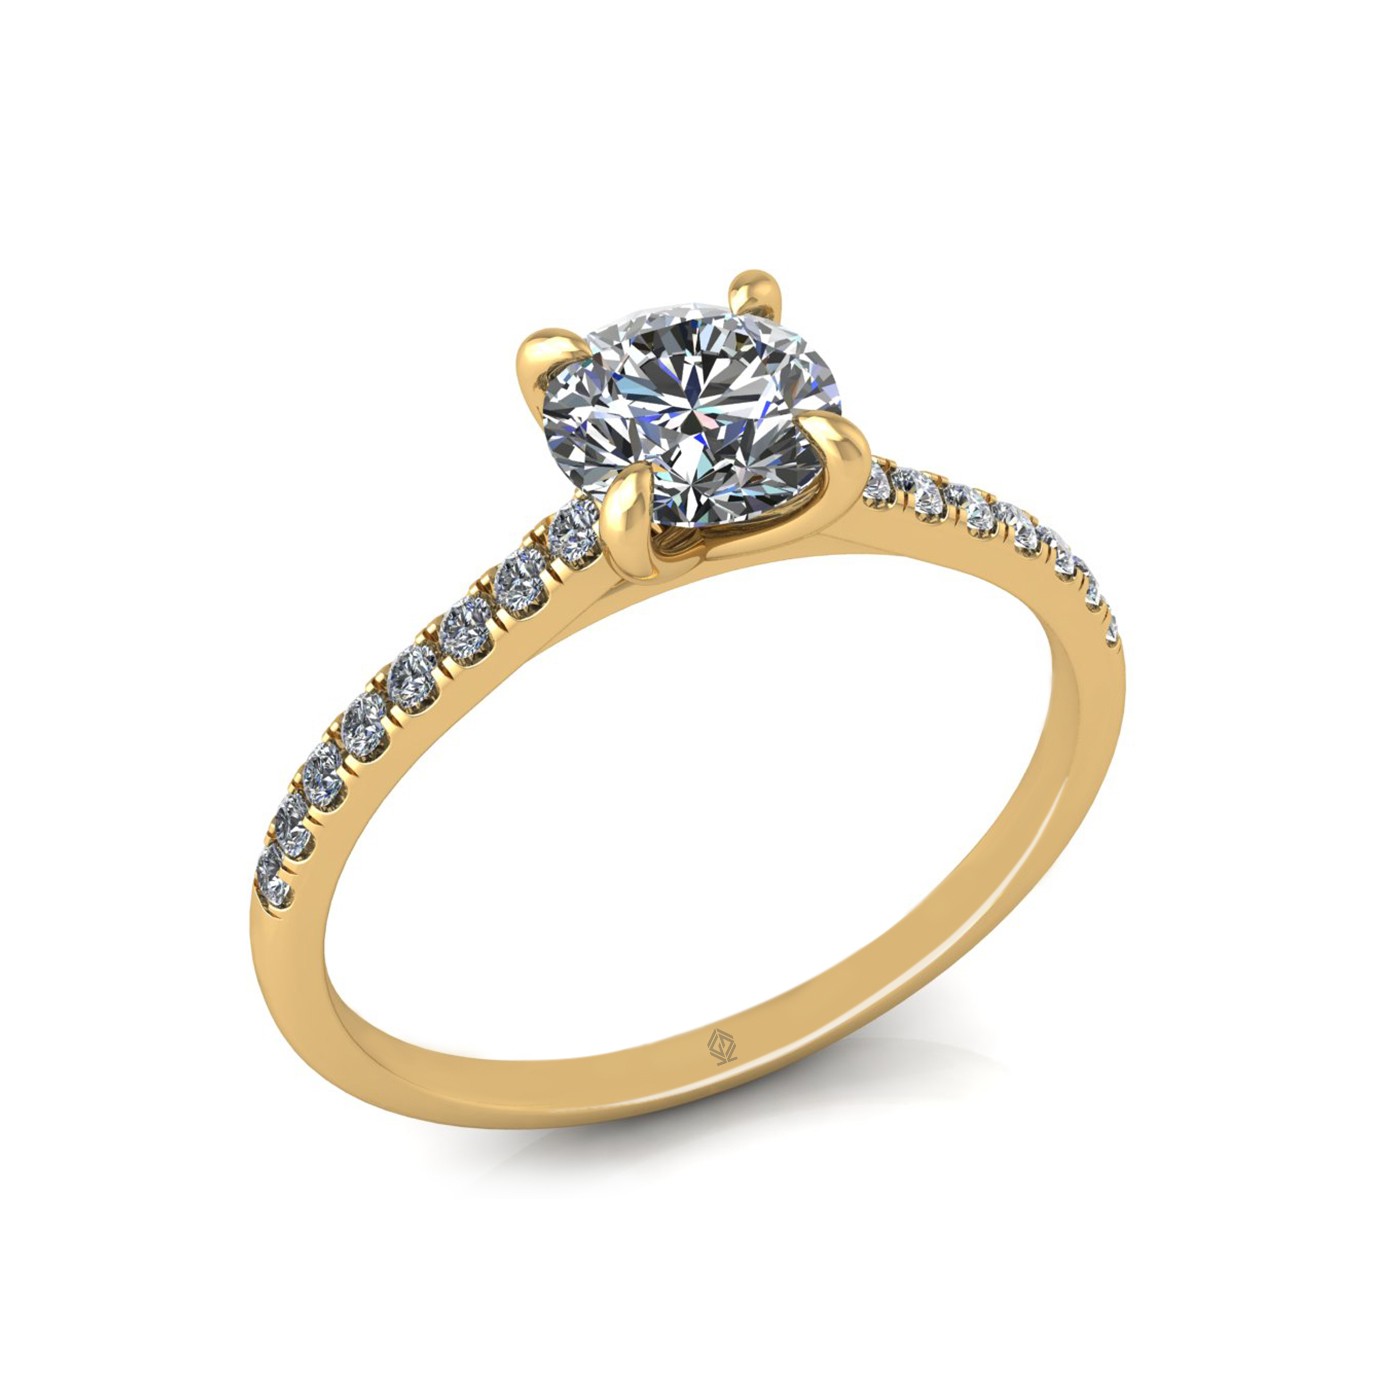 18k yellow gold 1.0ct 4 prongs round cut diamond engagement ring with whisper thin pavÉ set band